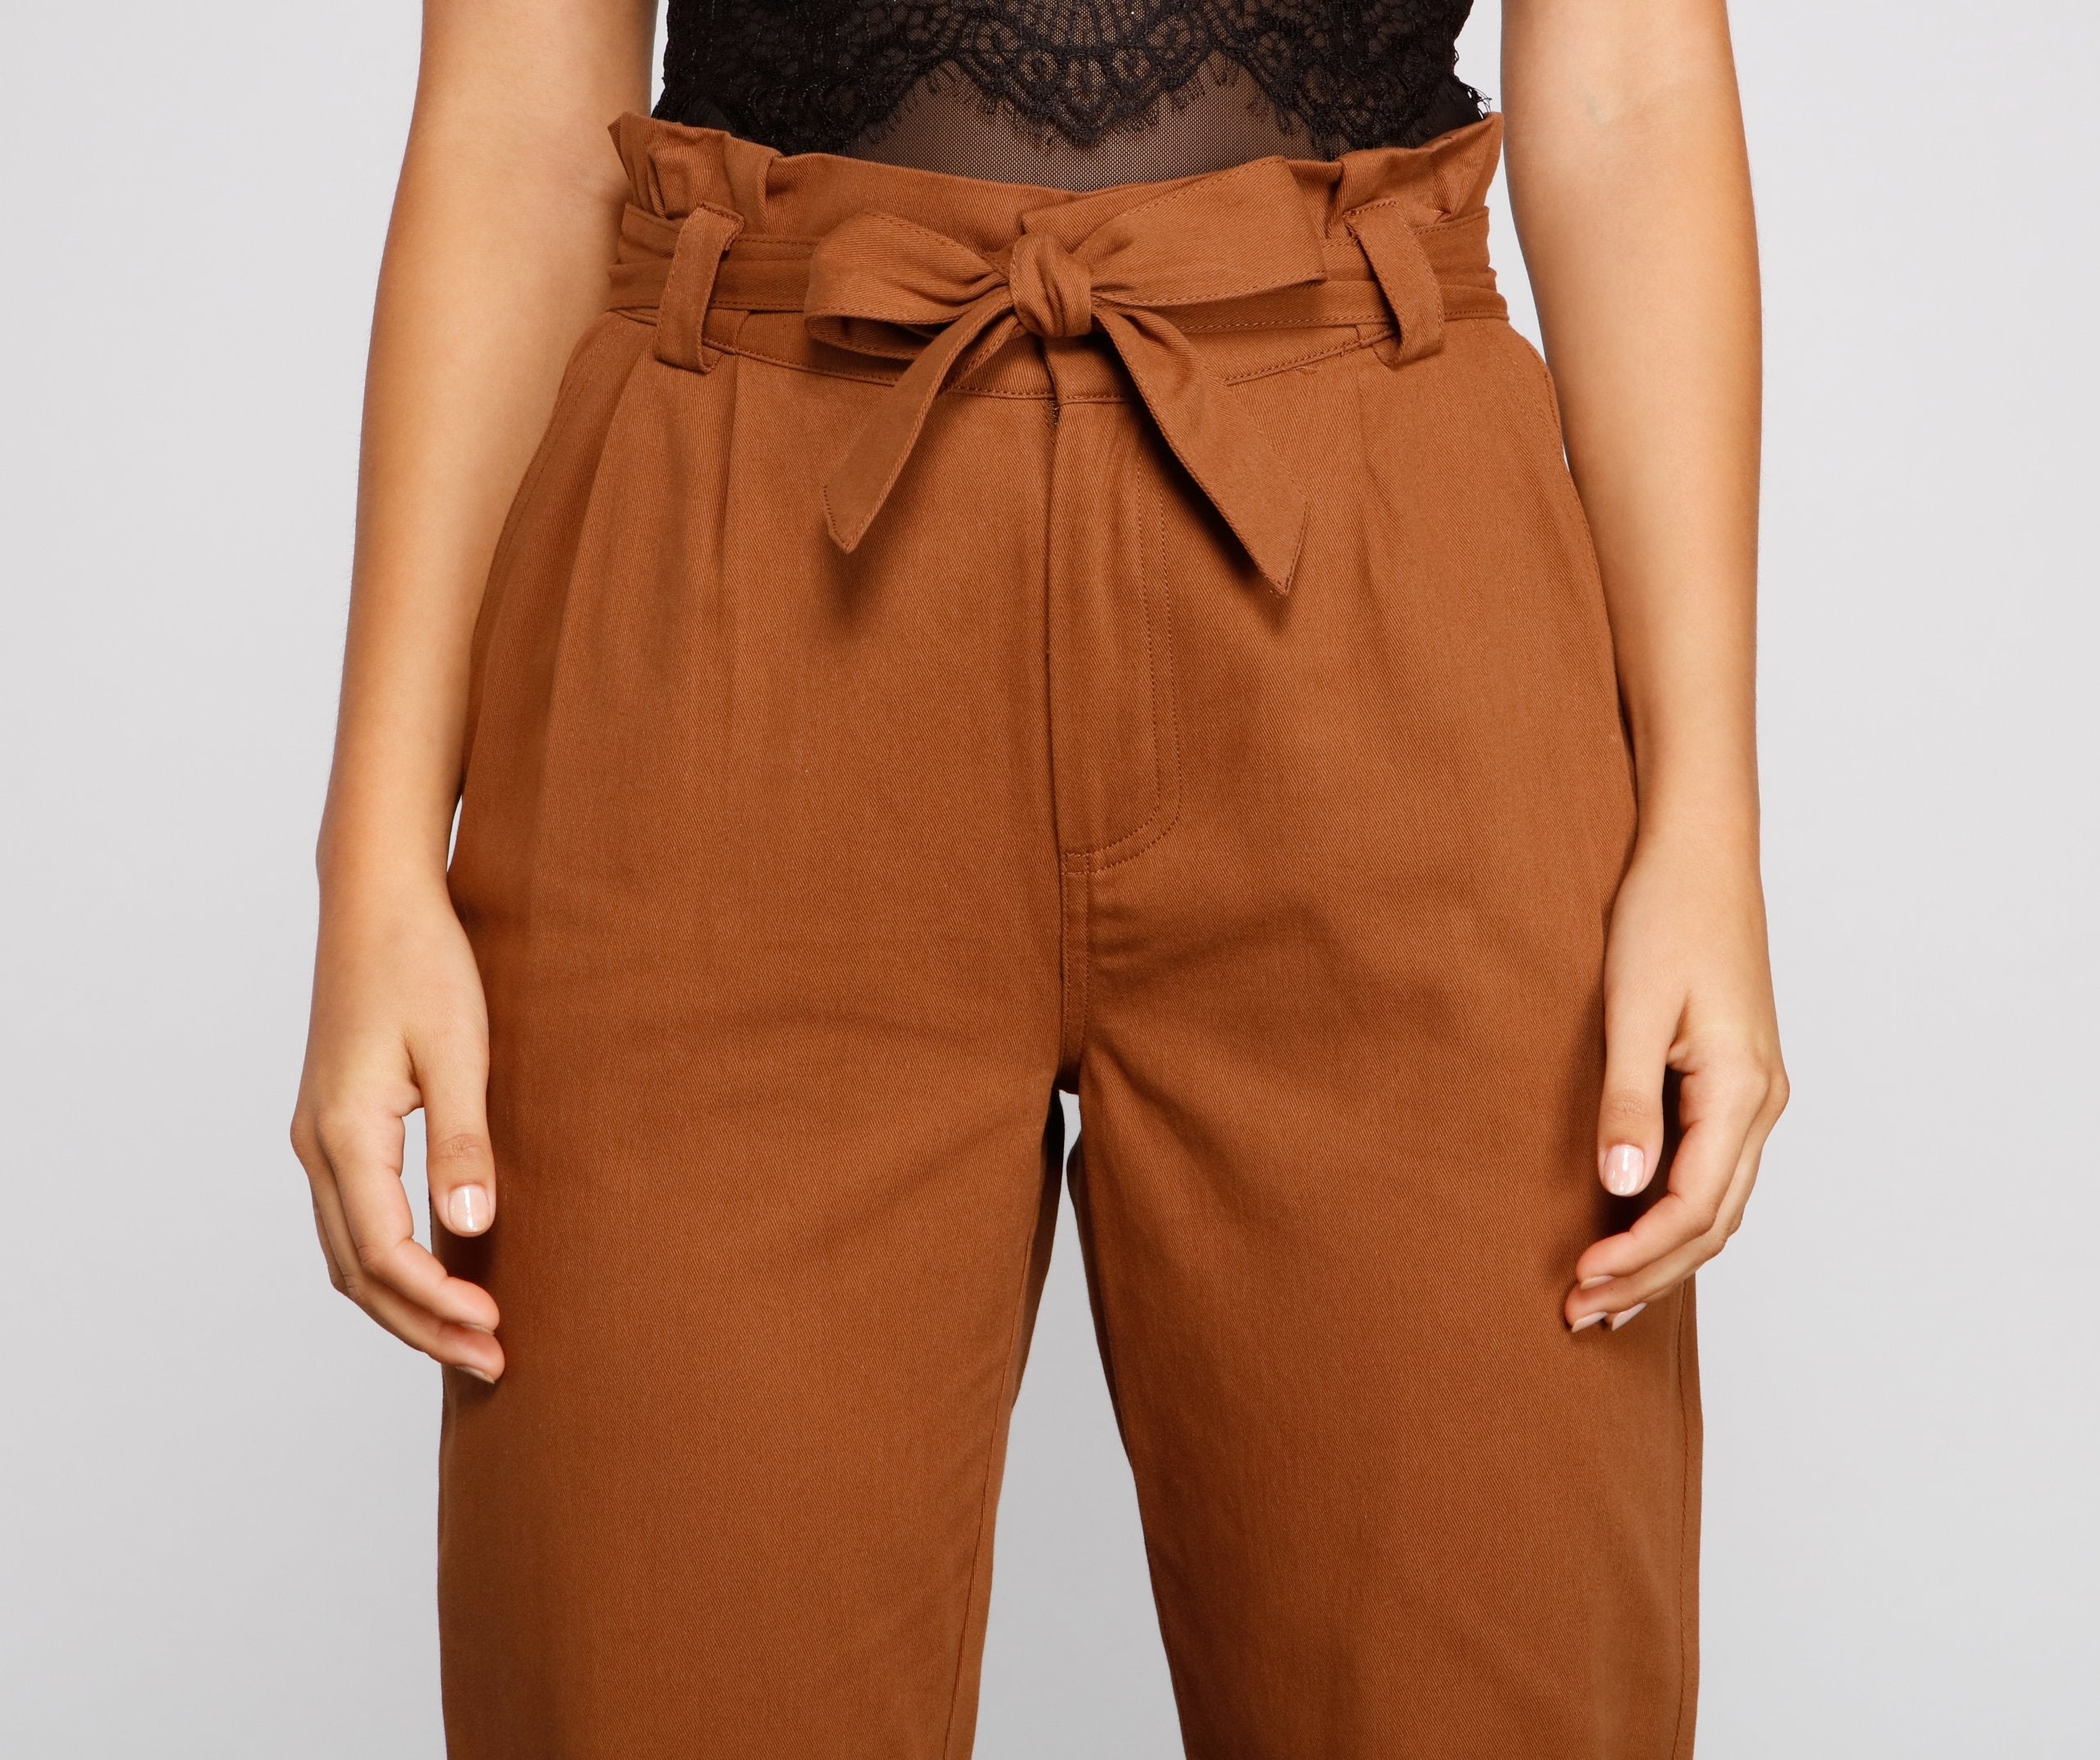 Trendy And Tapered High Waist Paperbag Pants - Lady Occasions